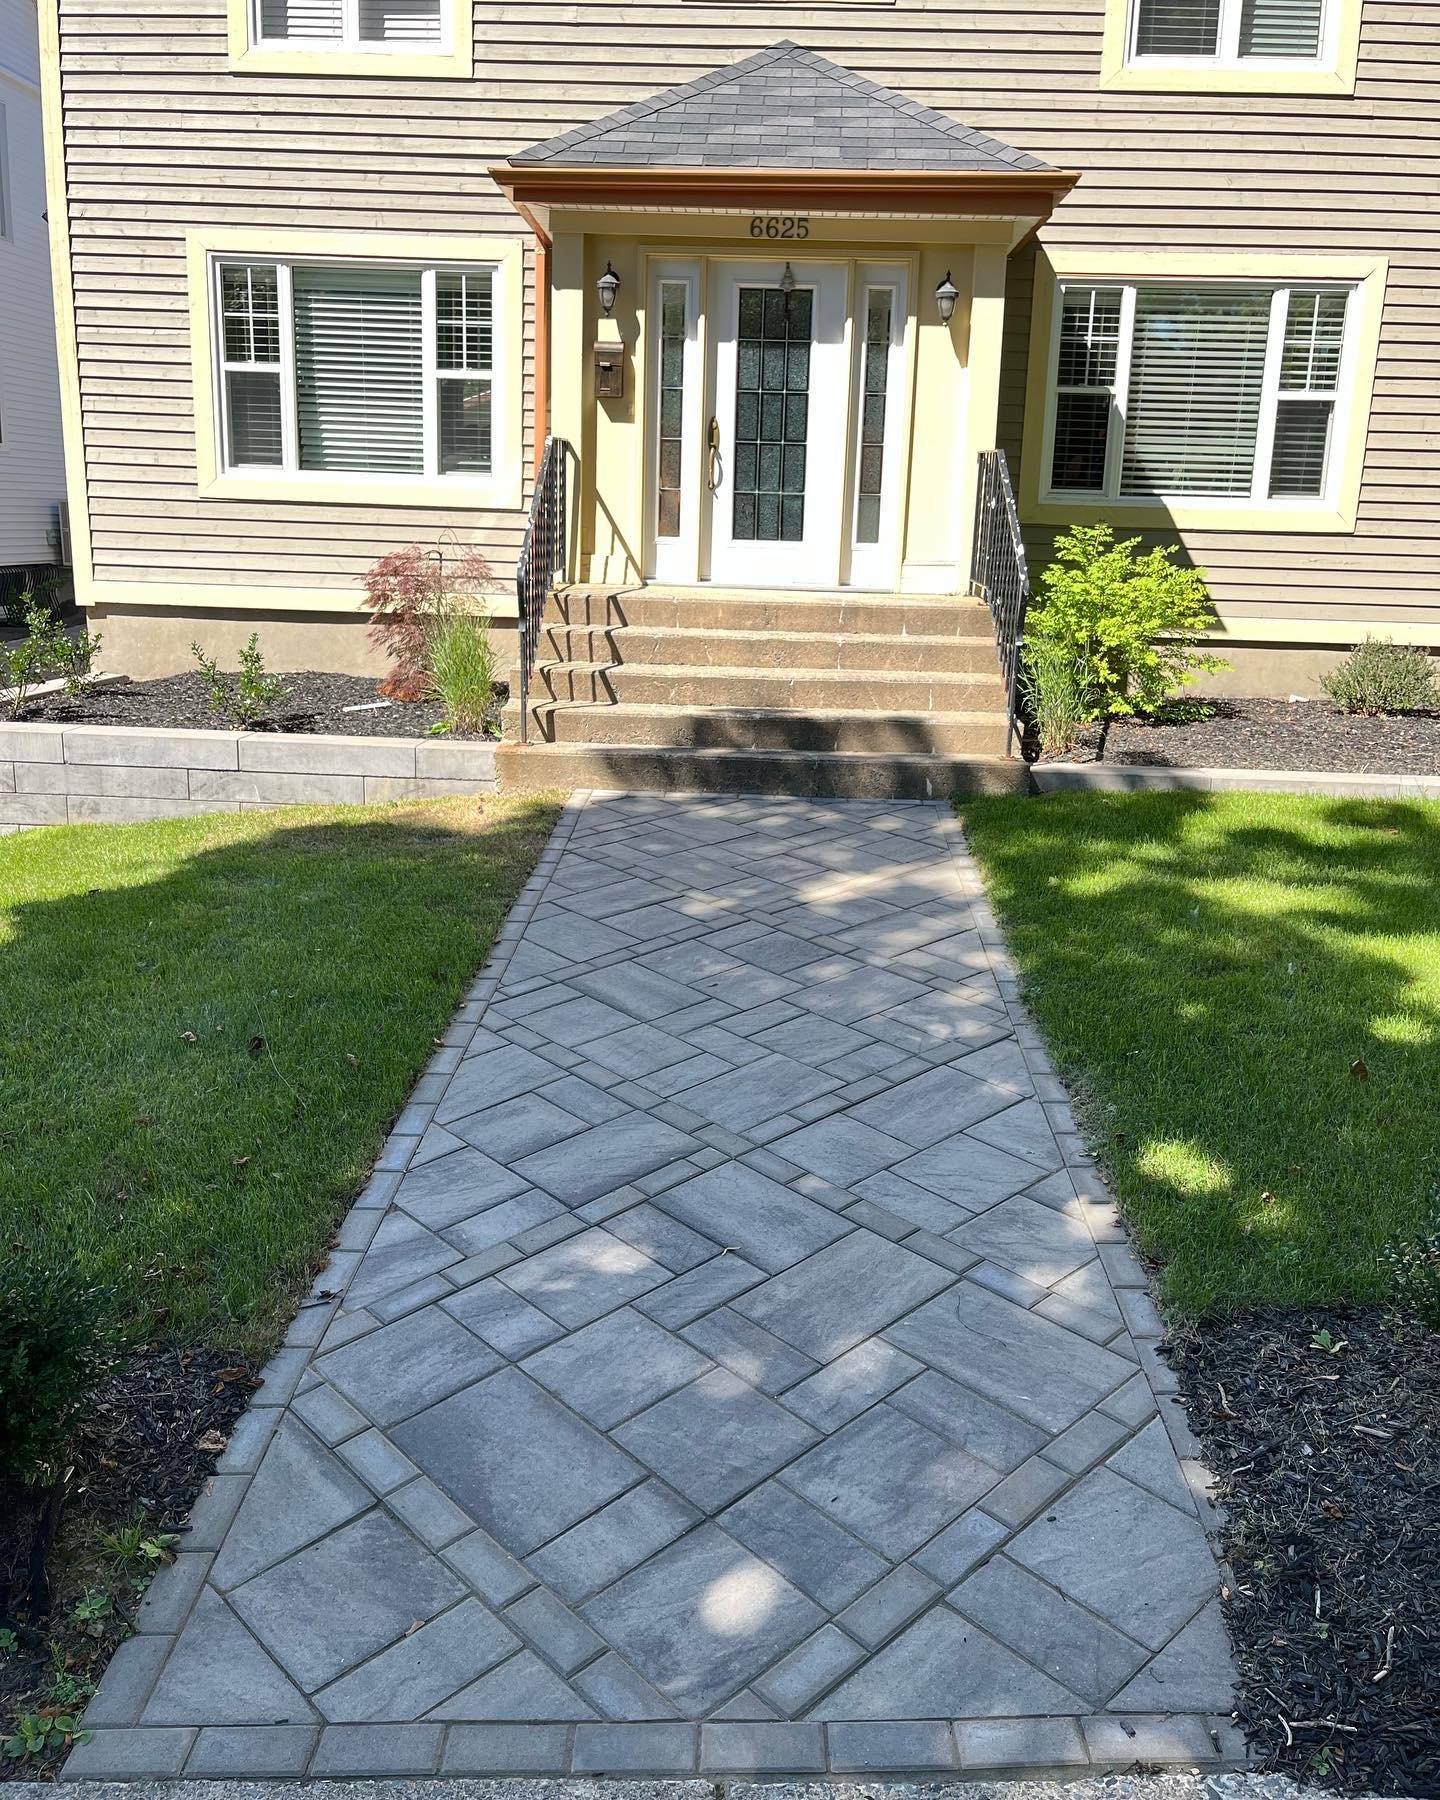 Pics or it didn&rsquo;t happen. 

#walkway#driveway#gardenwall #steps #landscaping #hardscaping #brick #contractor #work #photography #novascotia